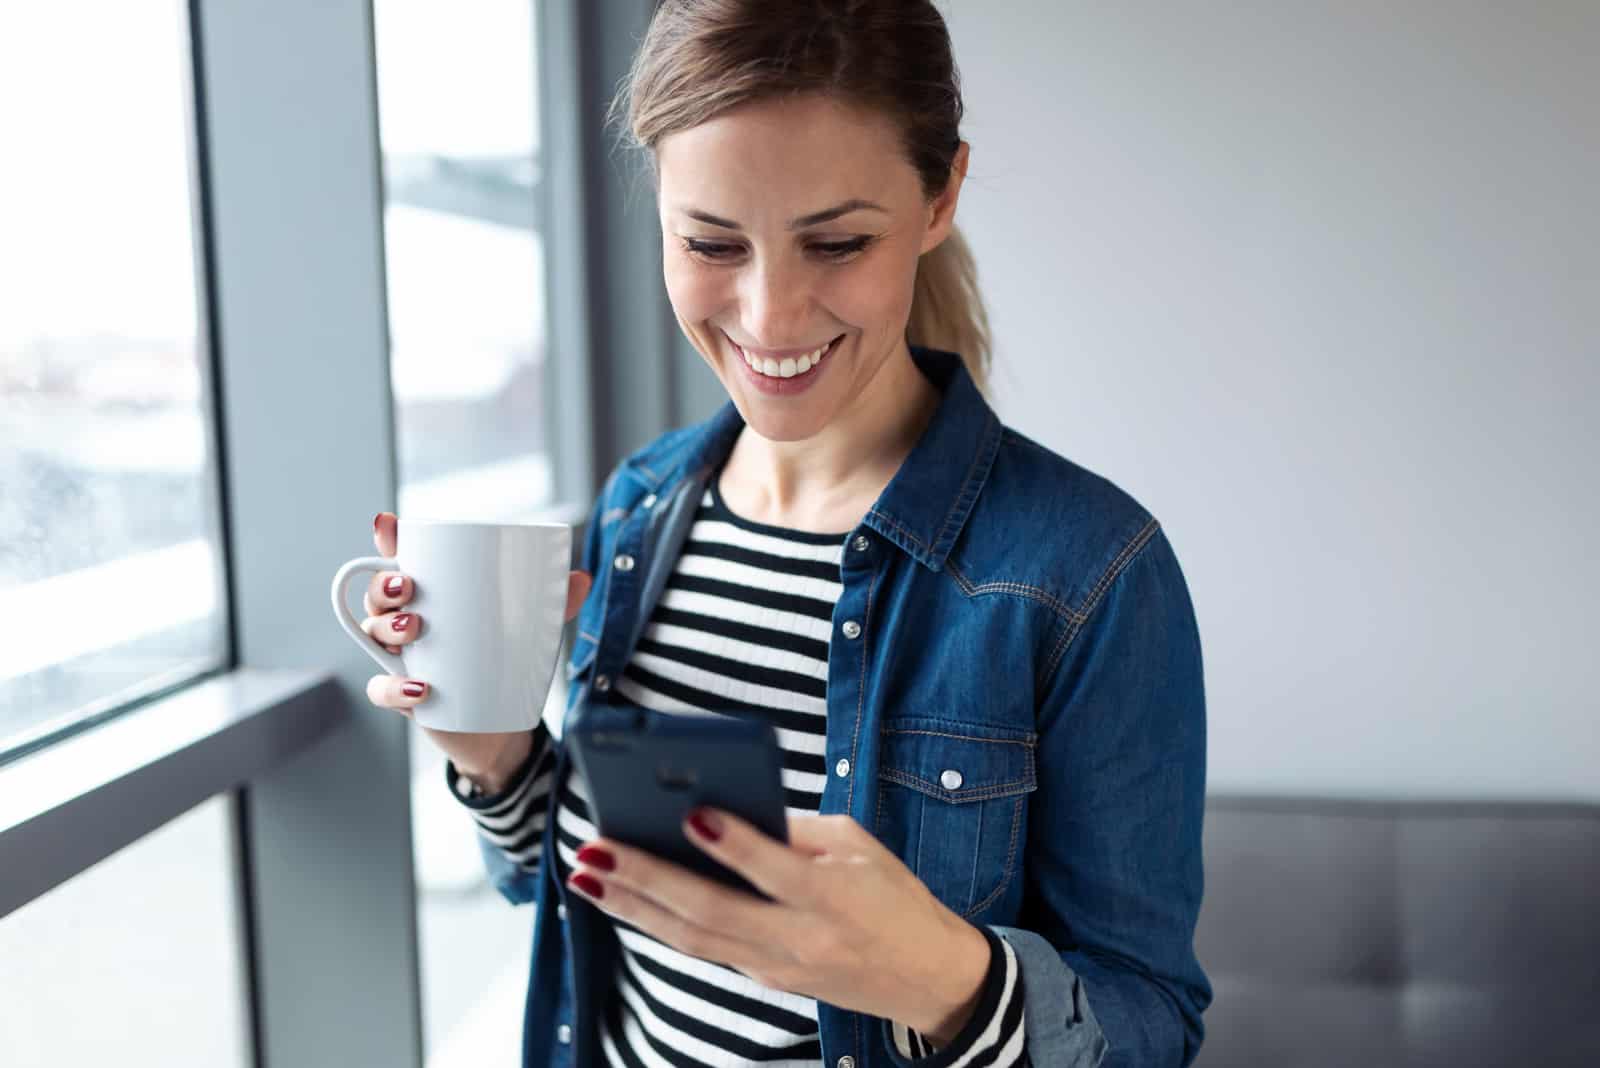 a smiling woman stands by the window and buttons on the phone